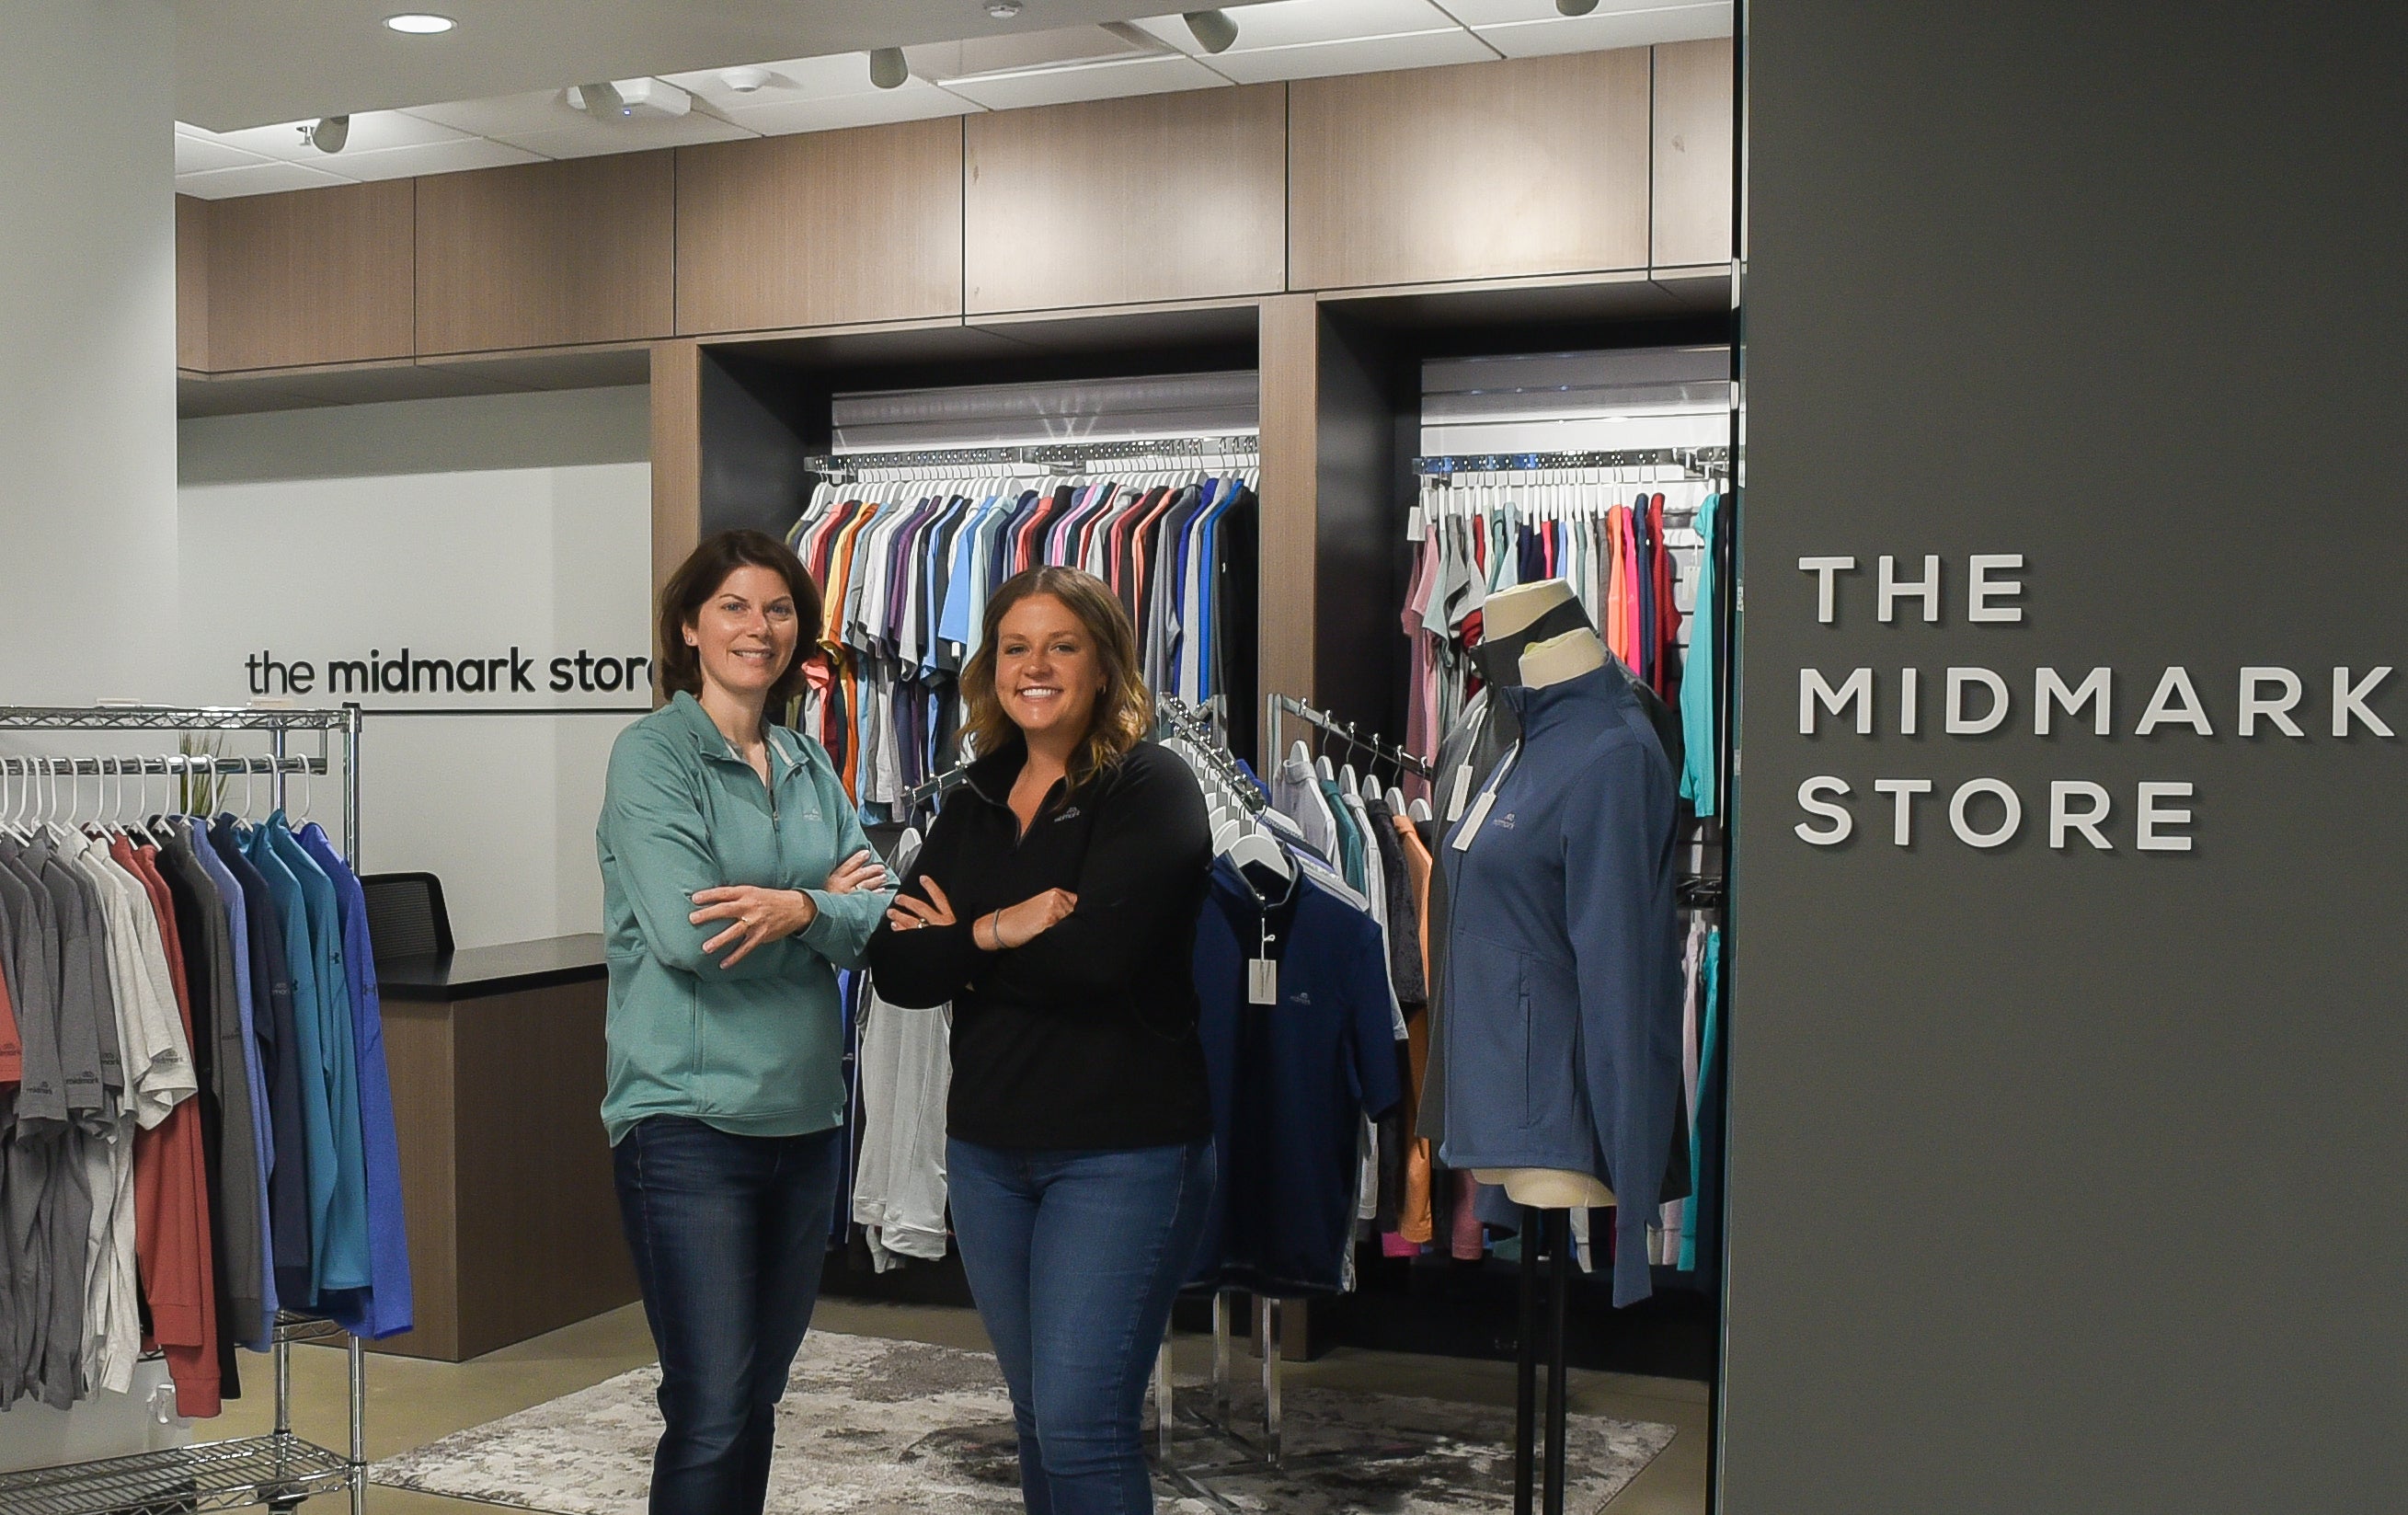 the midmark store-storefront